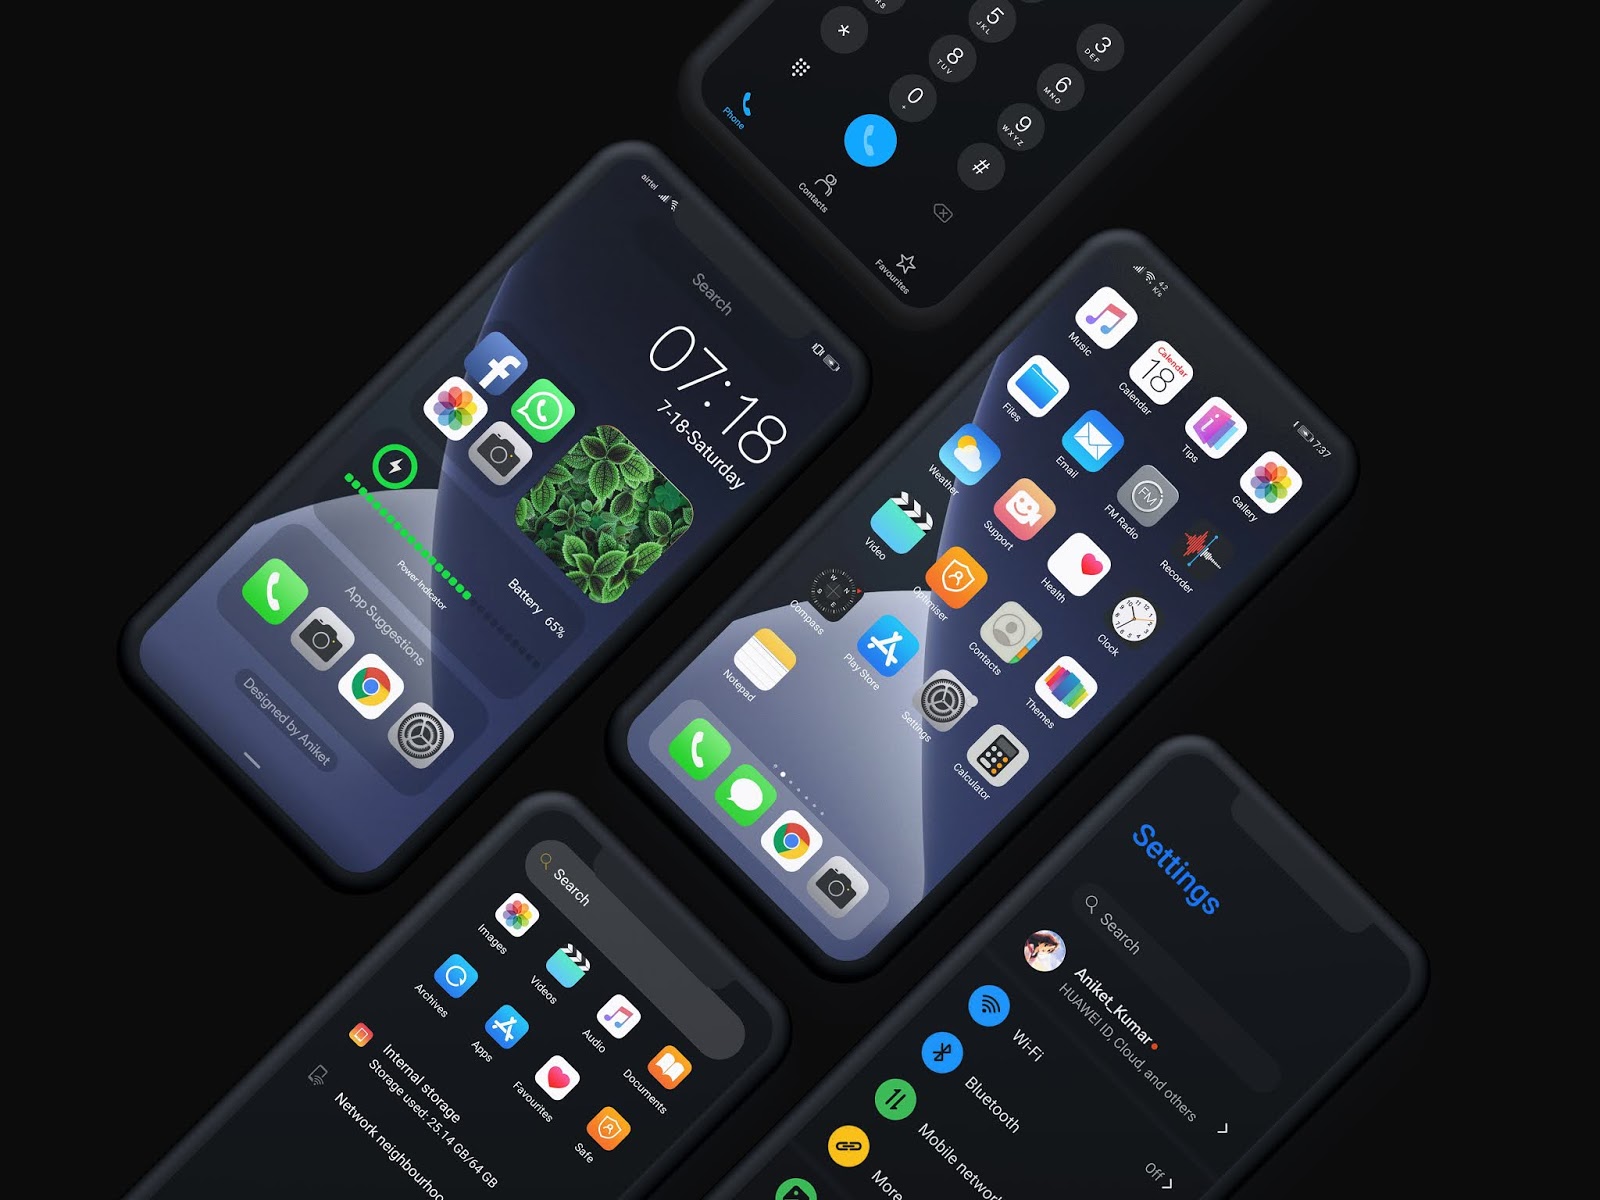 Cool Wallpapers & Backgrounds HD Theme for iPhone by Alexander Ninth